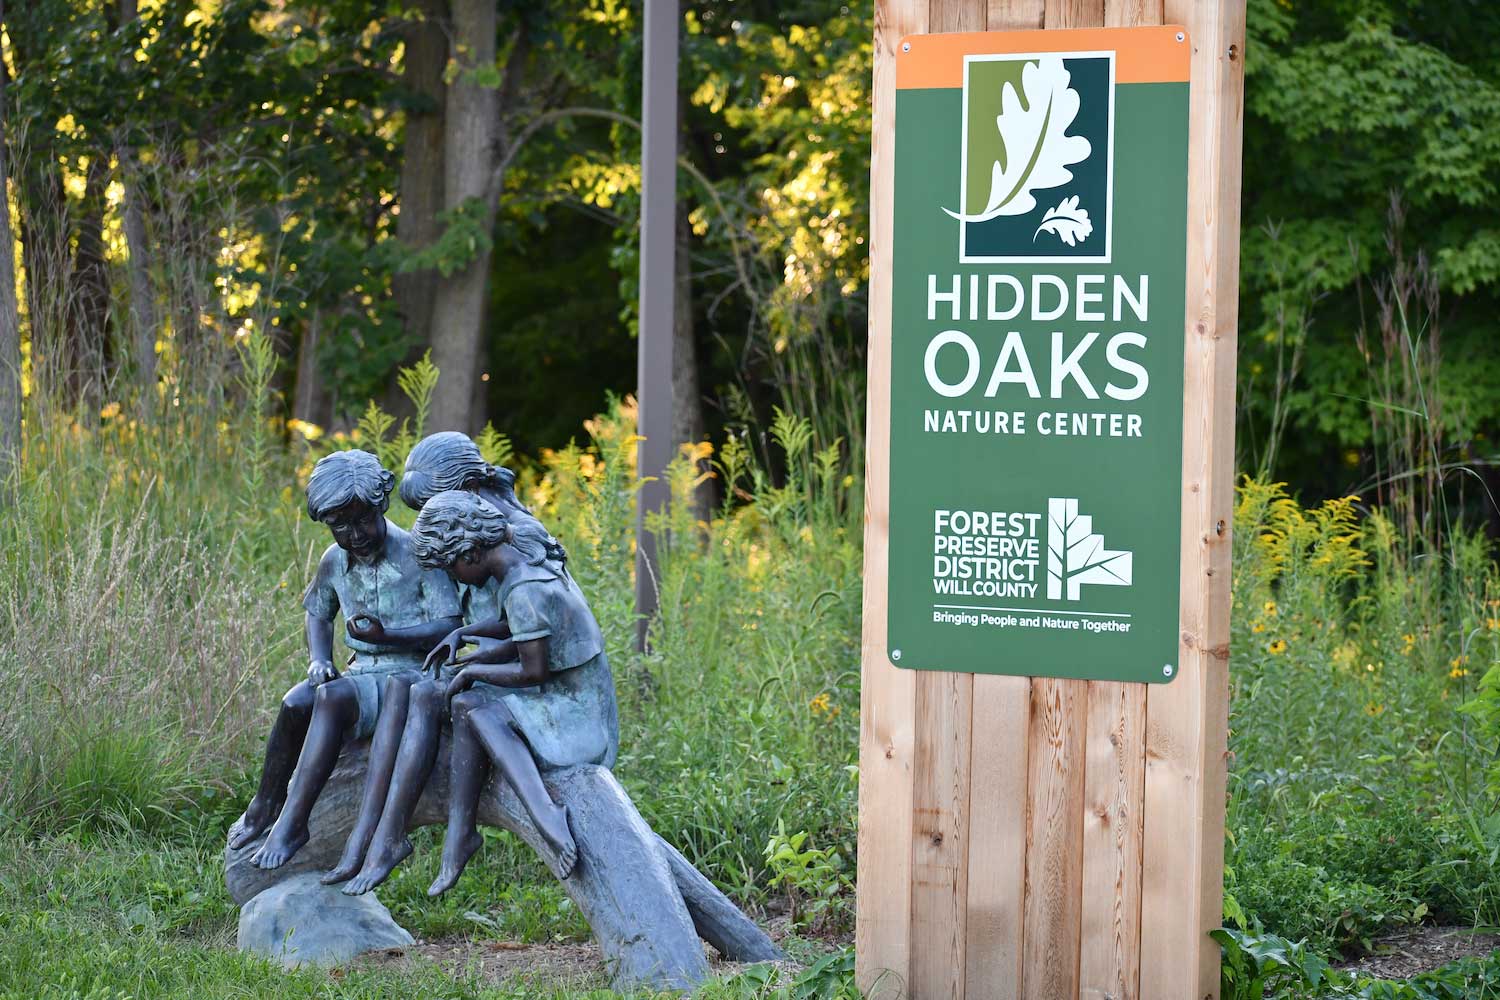 A statue of three children sitting in a log in front of a preserve sign.